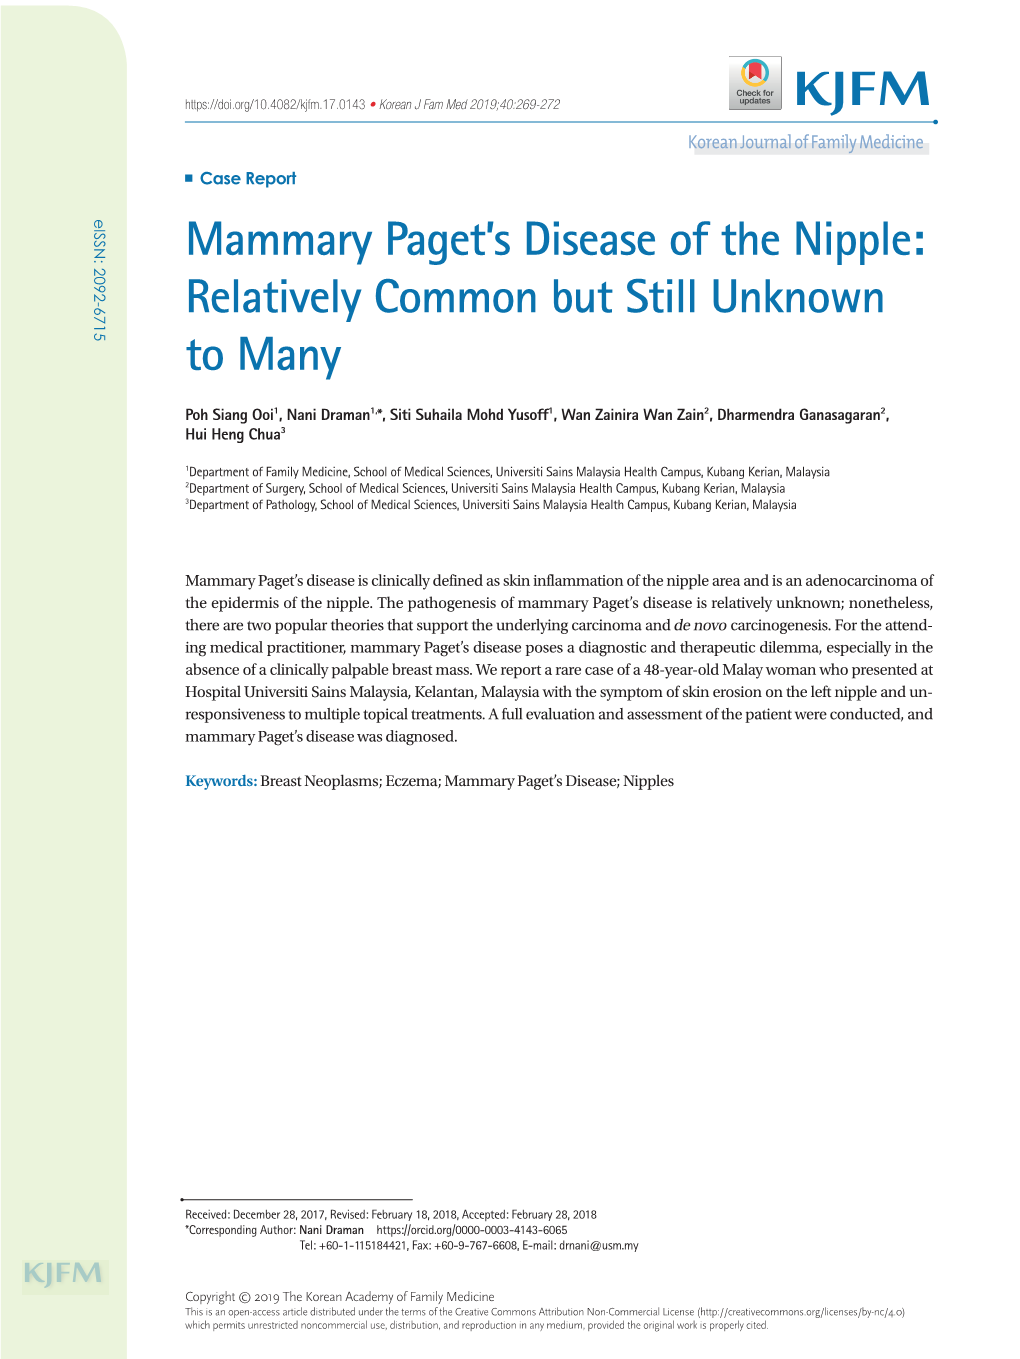 Mammary Paget's Disease of the Nipple